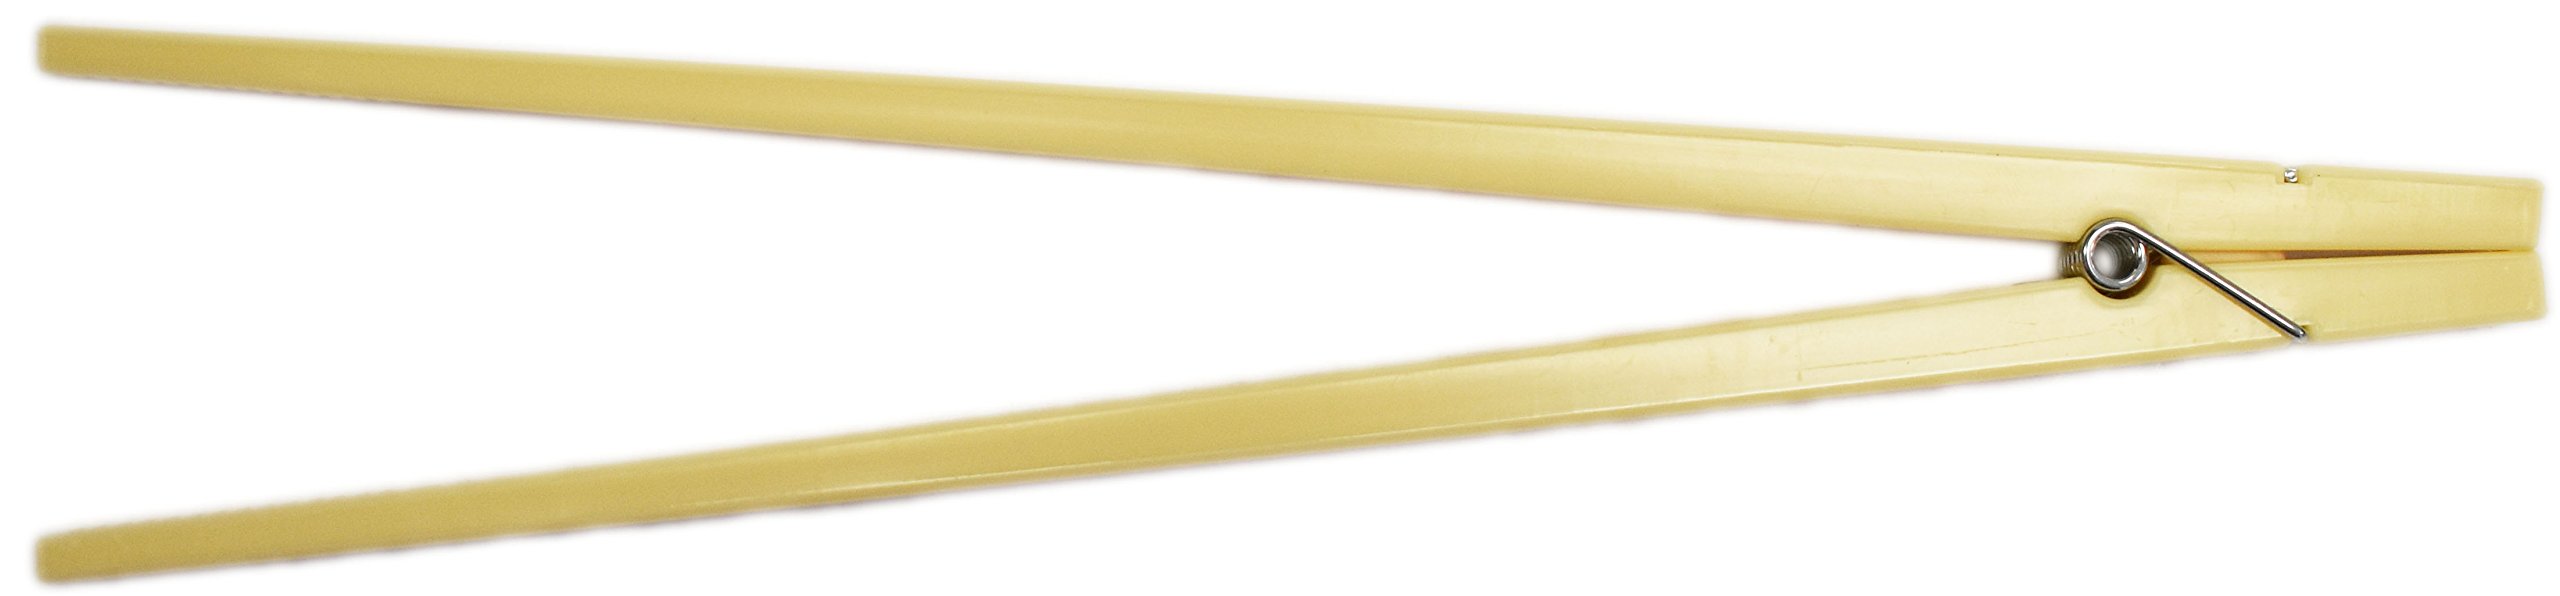 Set of 2 Clothespin Chopsticks! - Measures Approx. 9" Inches Long - Reusable Training Chopsticks - Beginners Chopsticks Perfect for any Age and Occasion! (2)